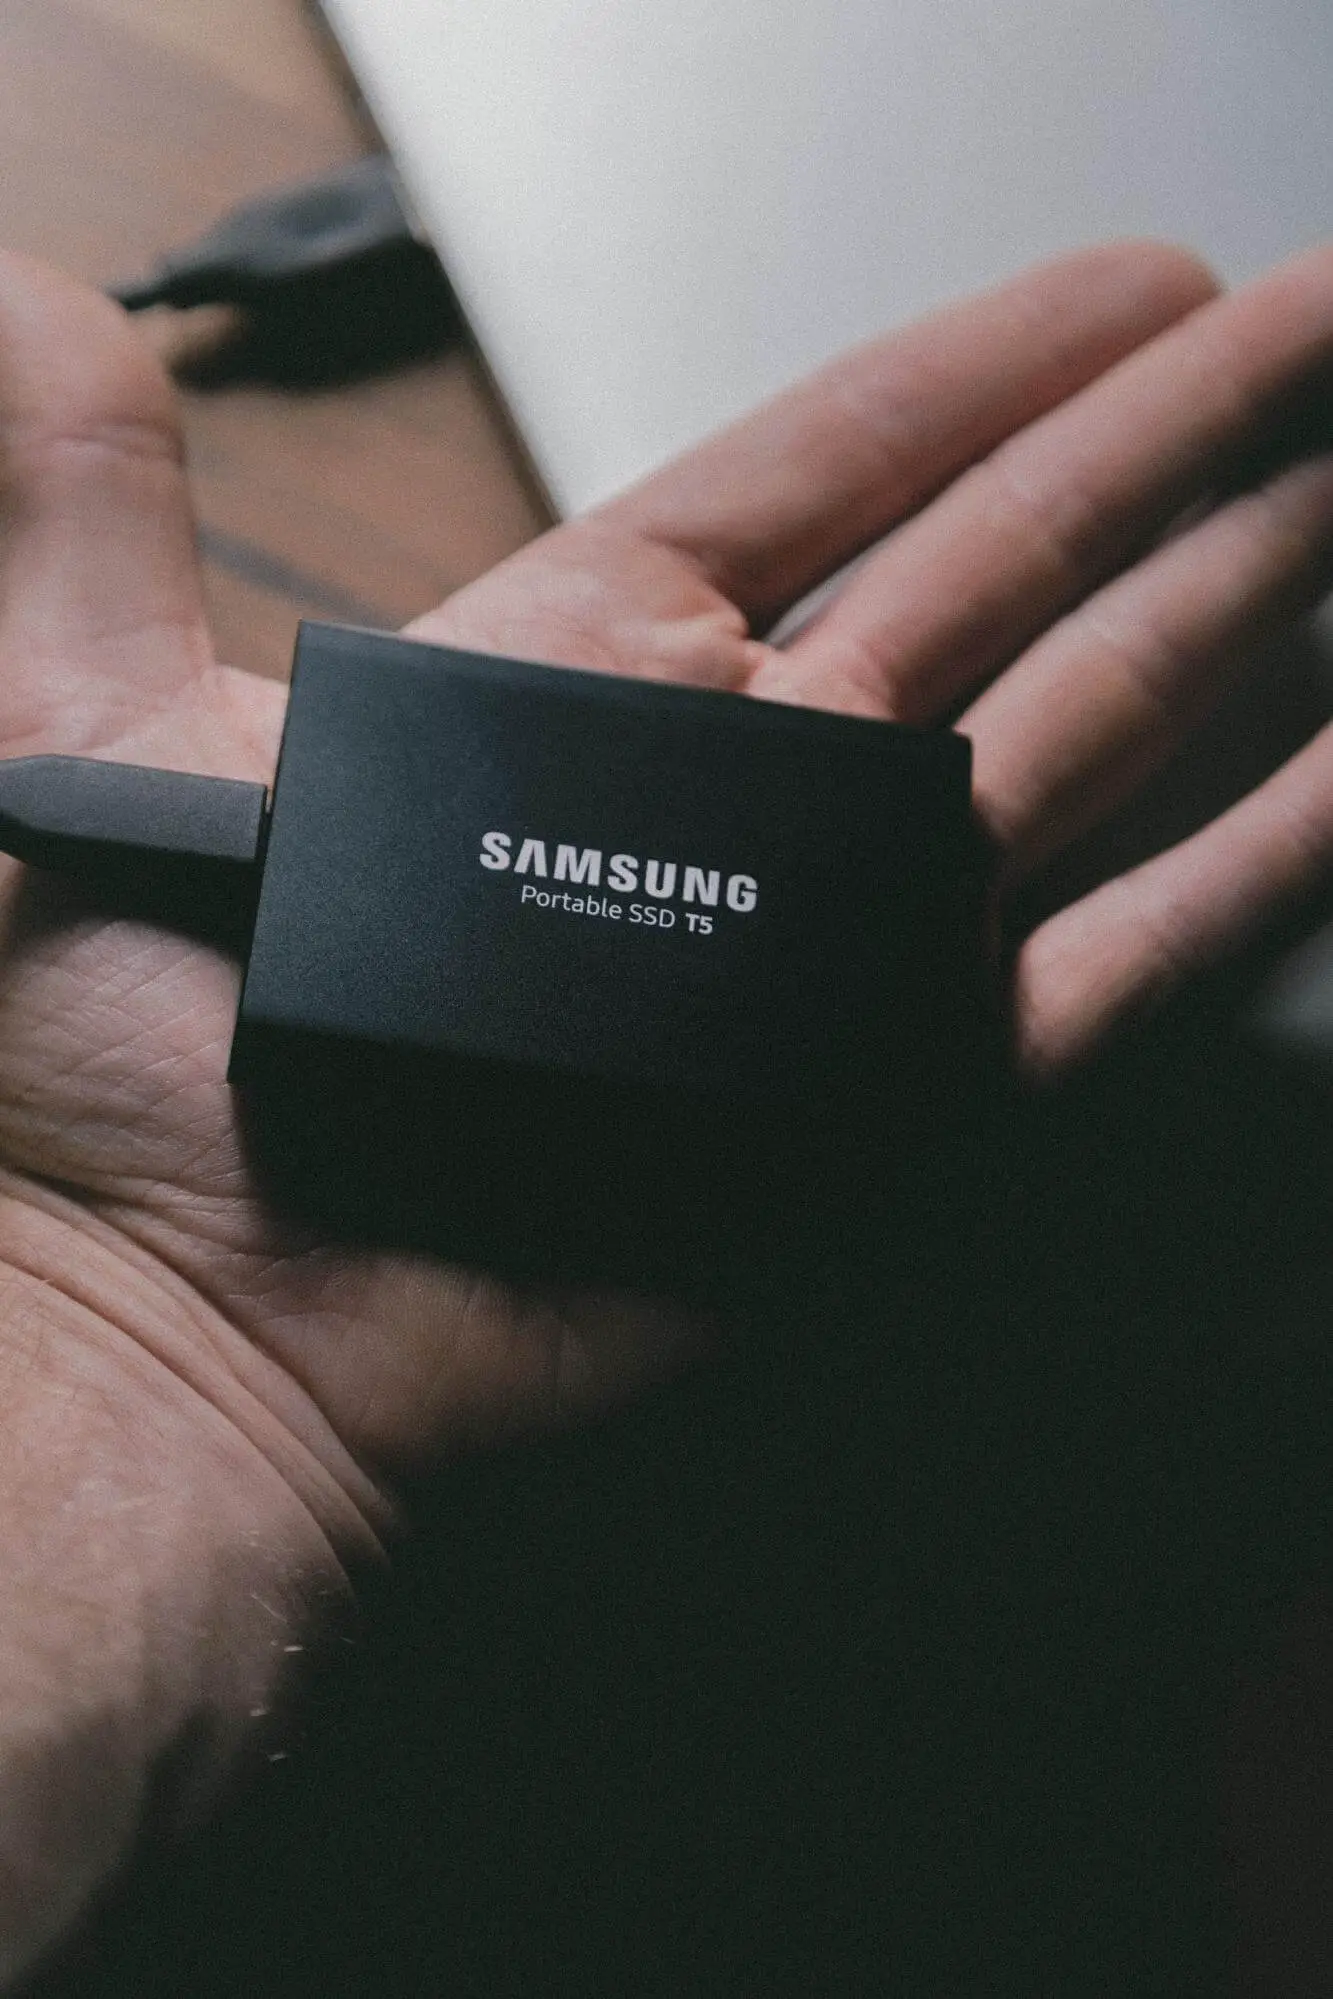 An external SSD is the palm of someone's hand